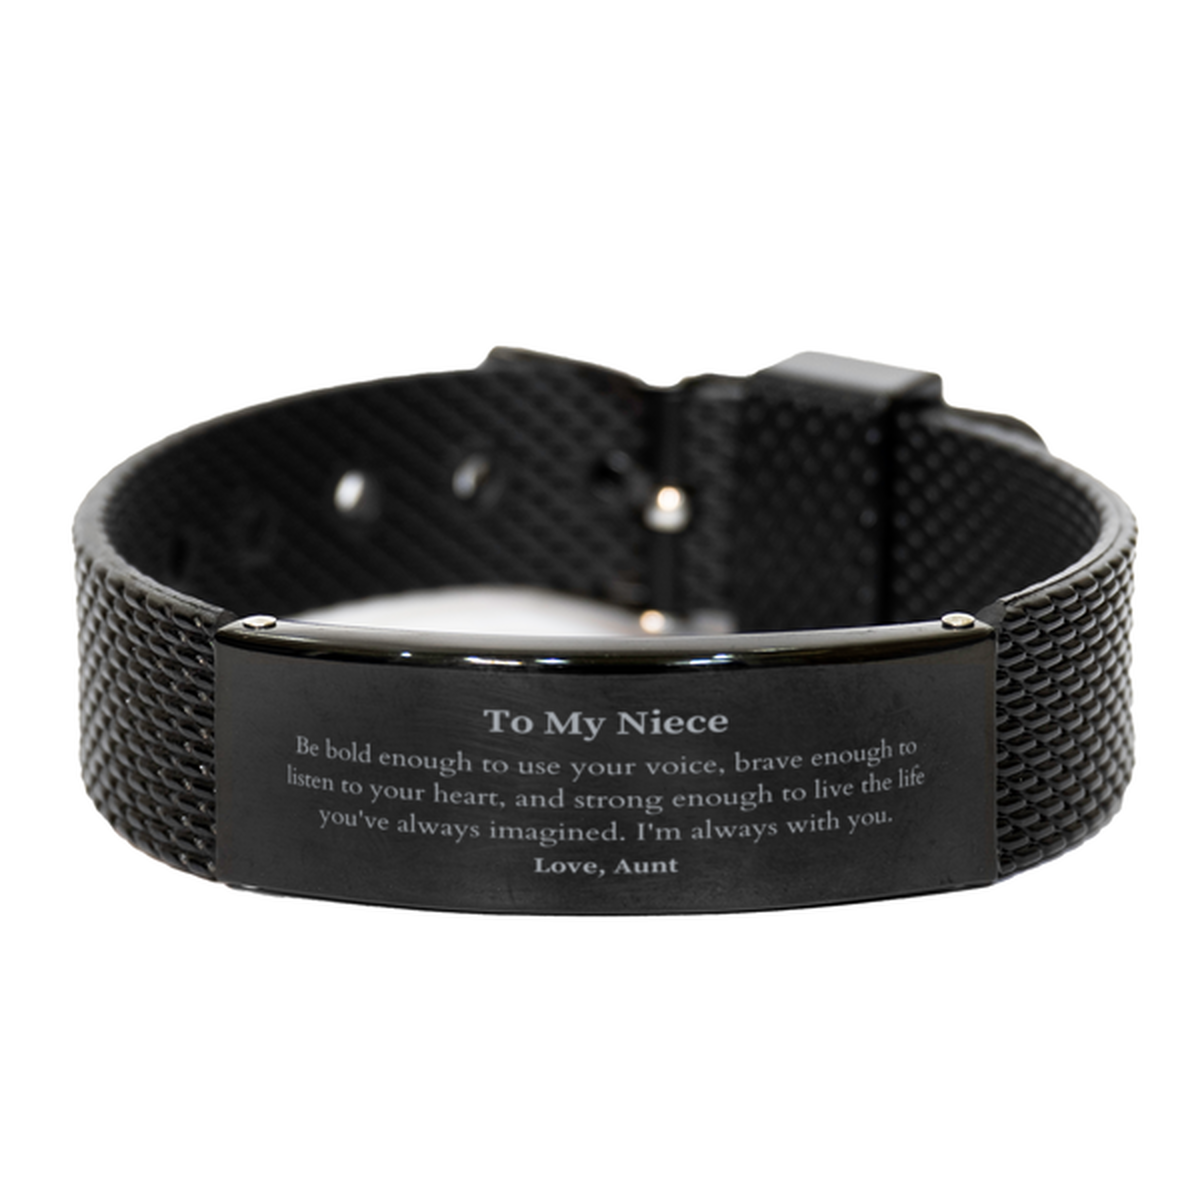 Keepsake Niece Black Shark Mesh Bracelet Gift Idea Graduation Christmas Birthday Niece from Aunt, Niece Be bold enough to use your voice, brave enough to listen to your heart. Love, Aunt